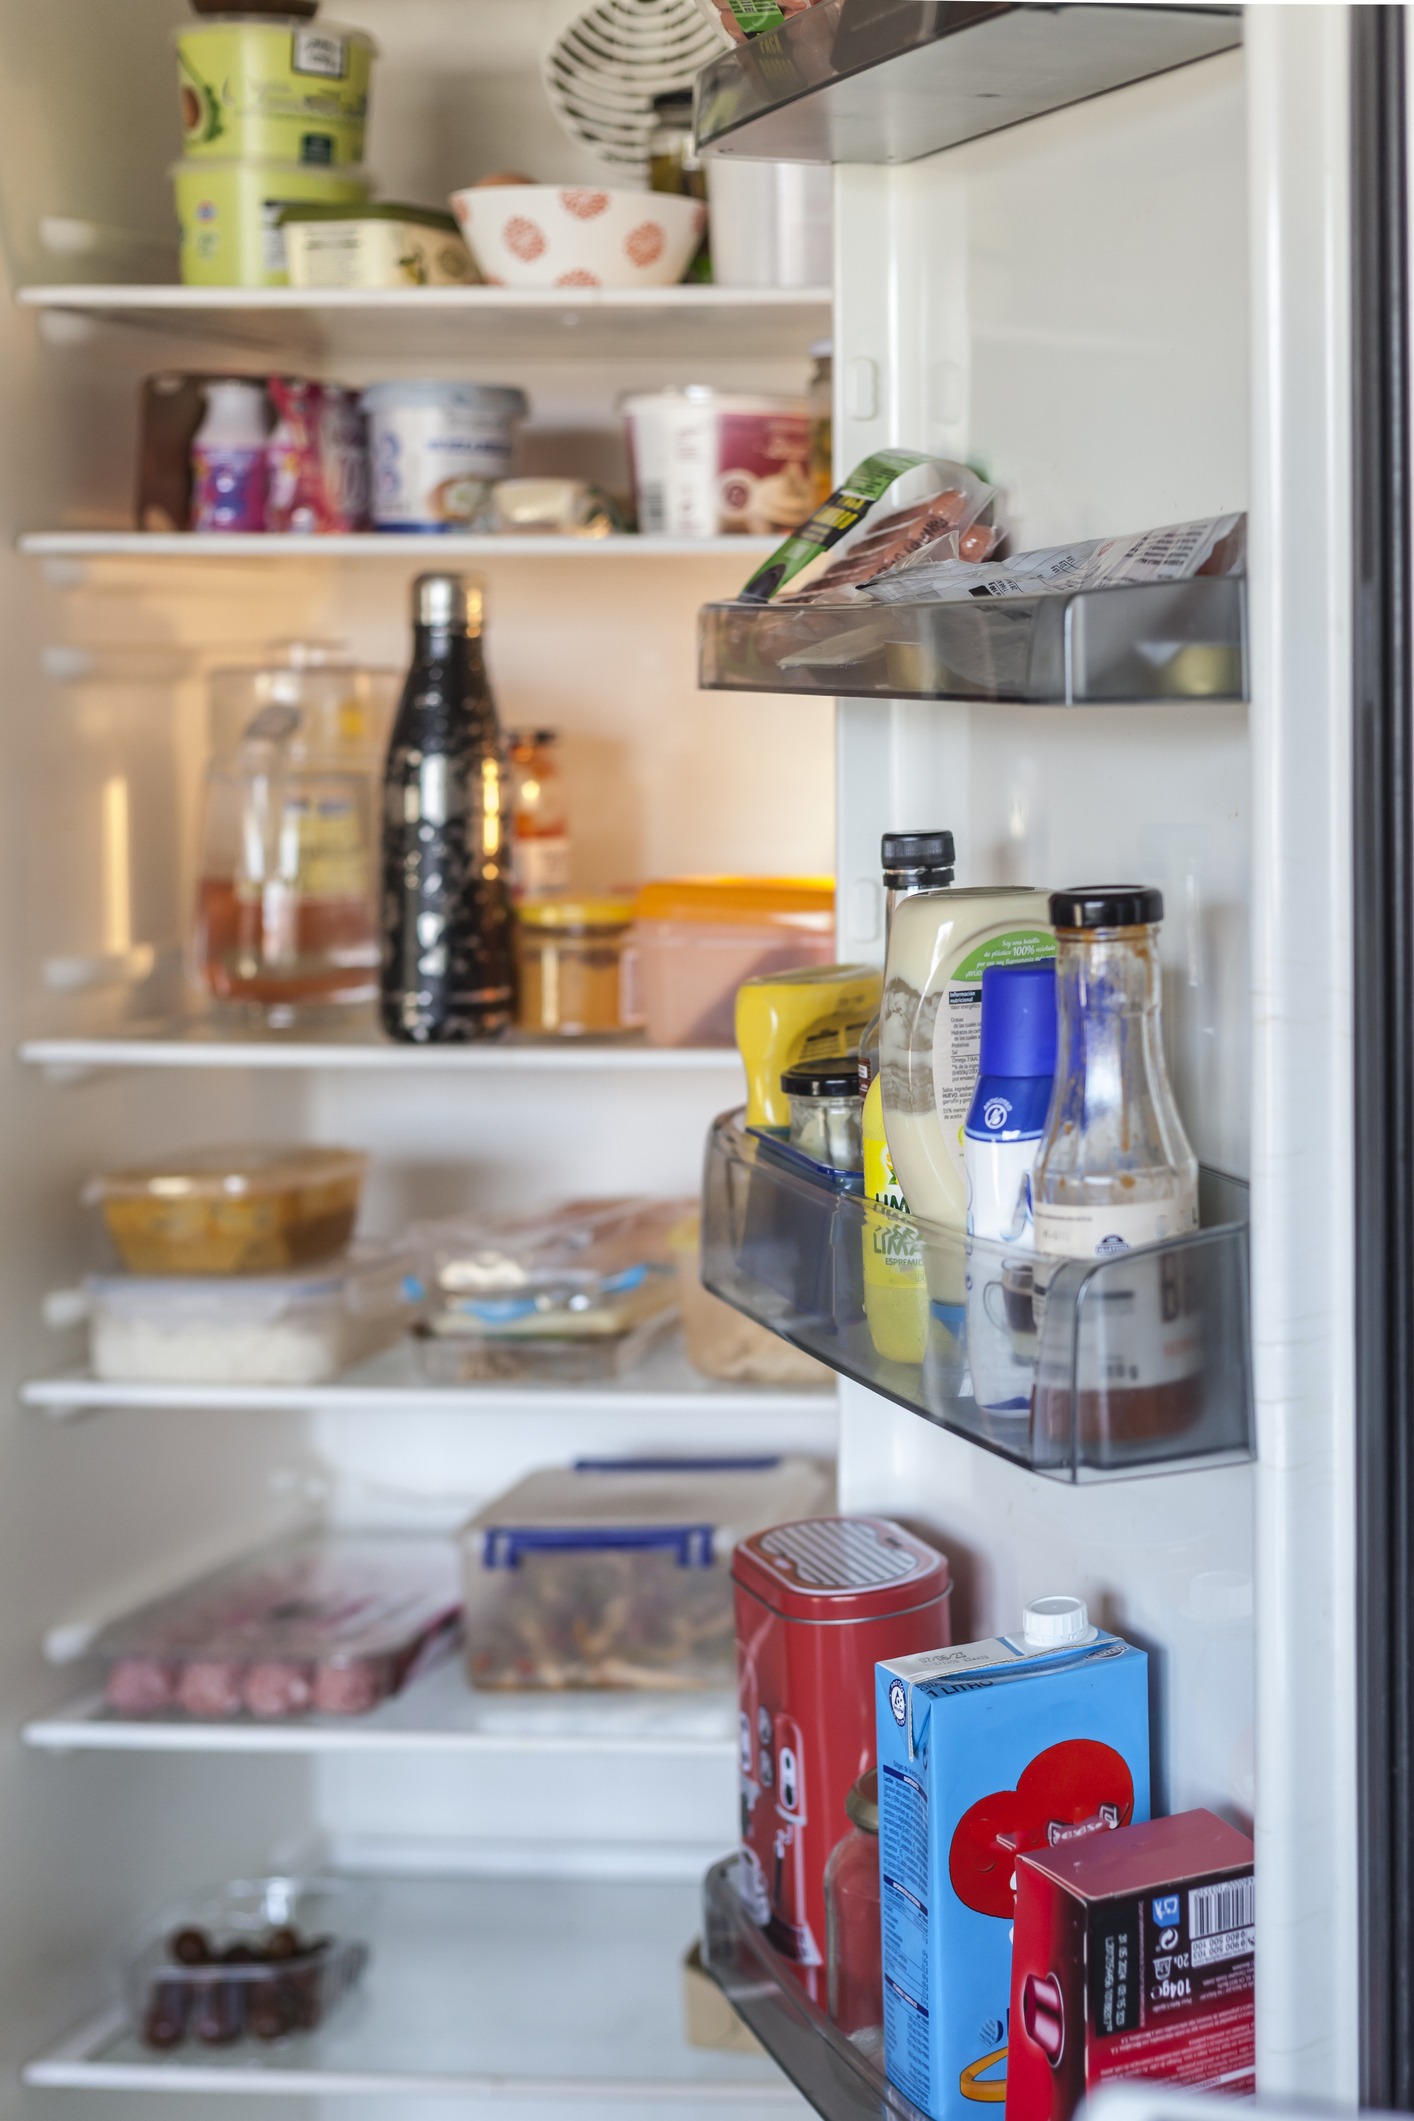 The image shows a neatly organized, open refrigerator filled with various foods, drinks, and condiments on the shelves and door compartments